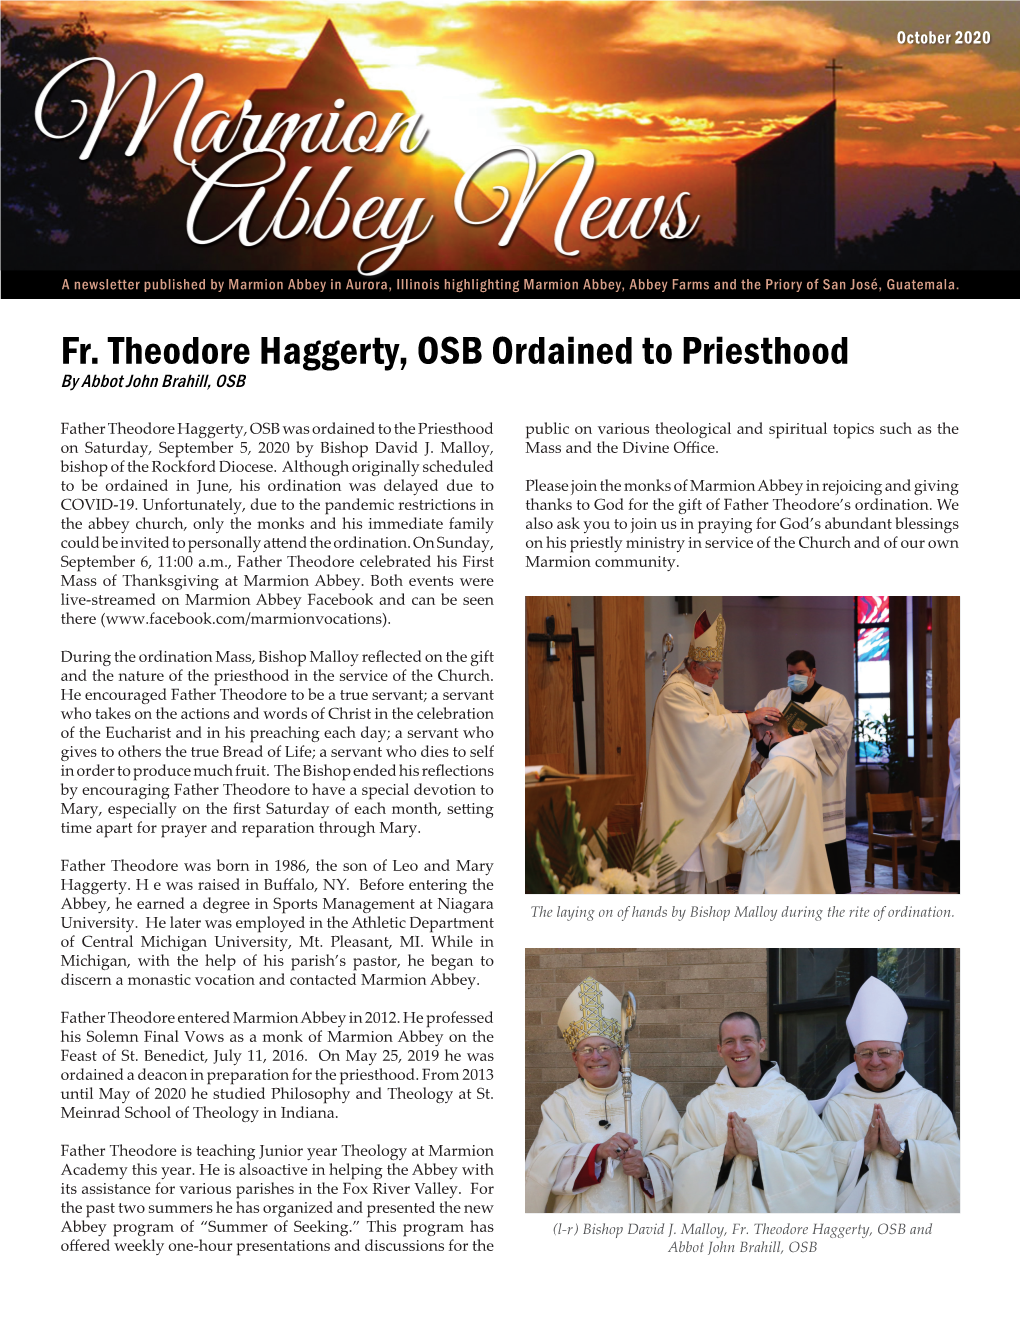 Fr. Theodore Haggerty, OSB Ordained to Priesthood by Abbot John Brahill, OSB